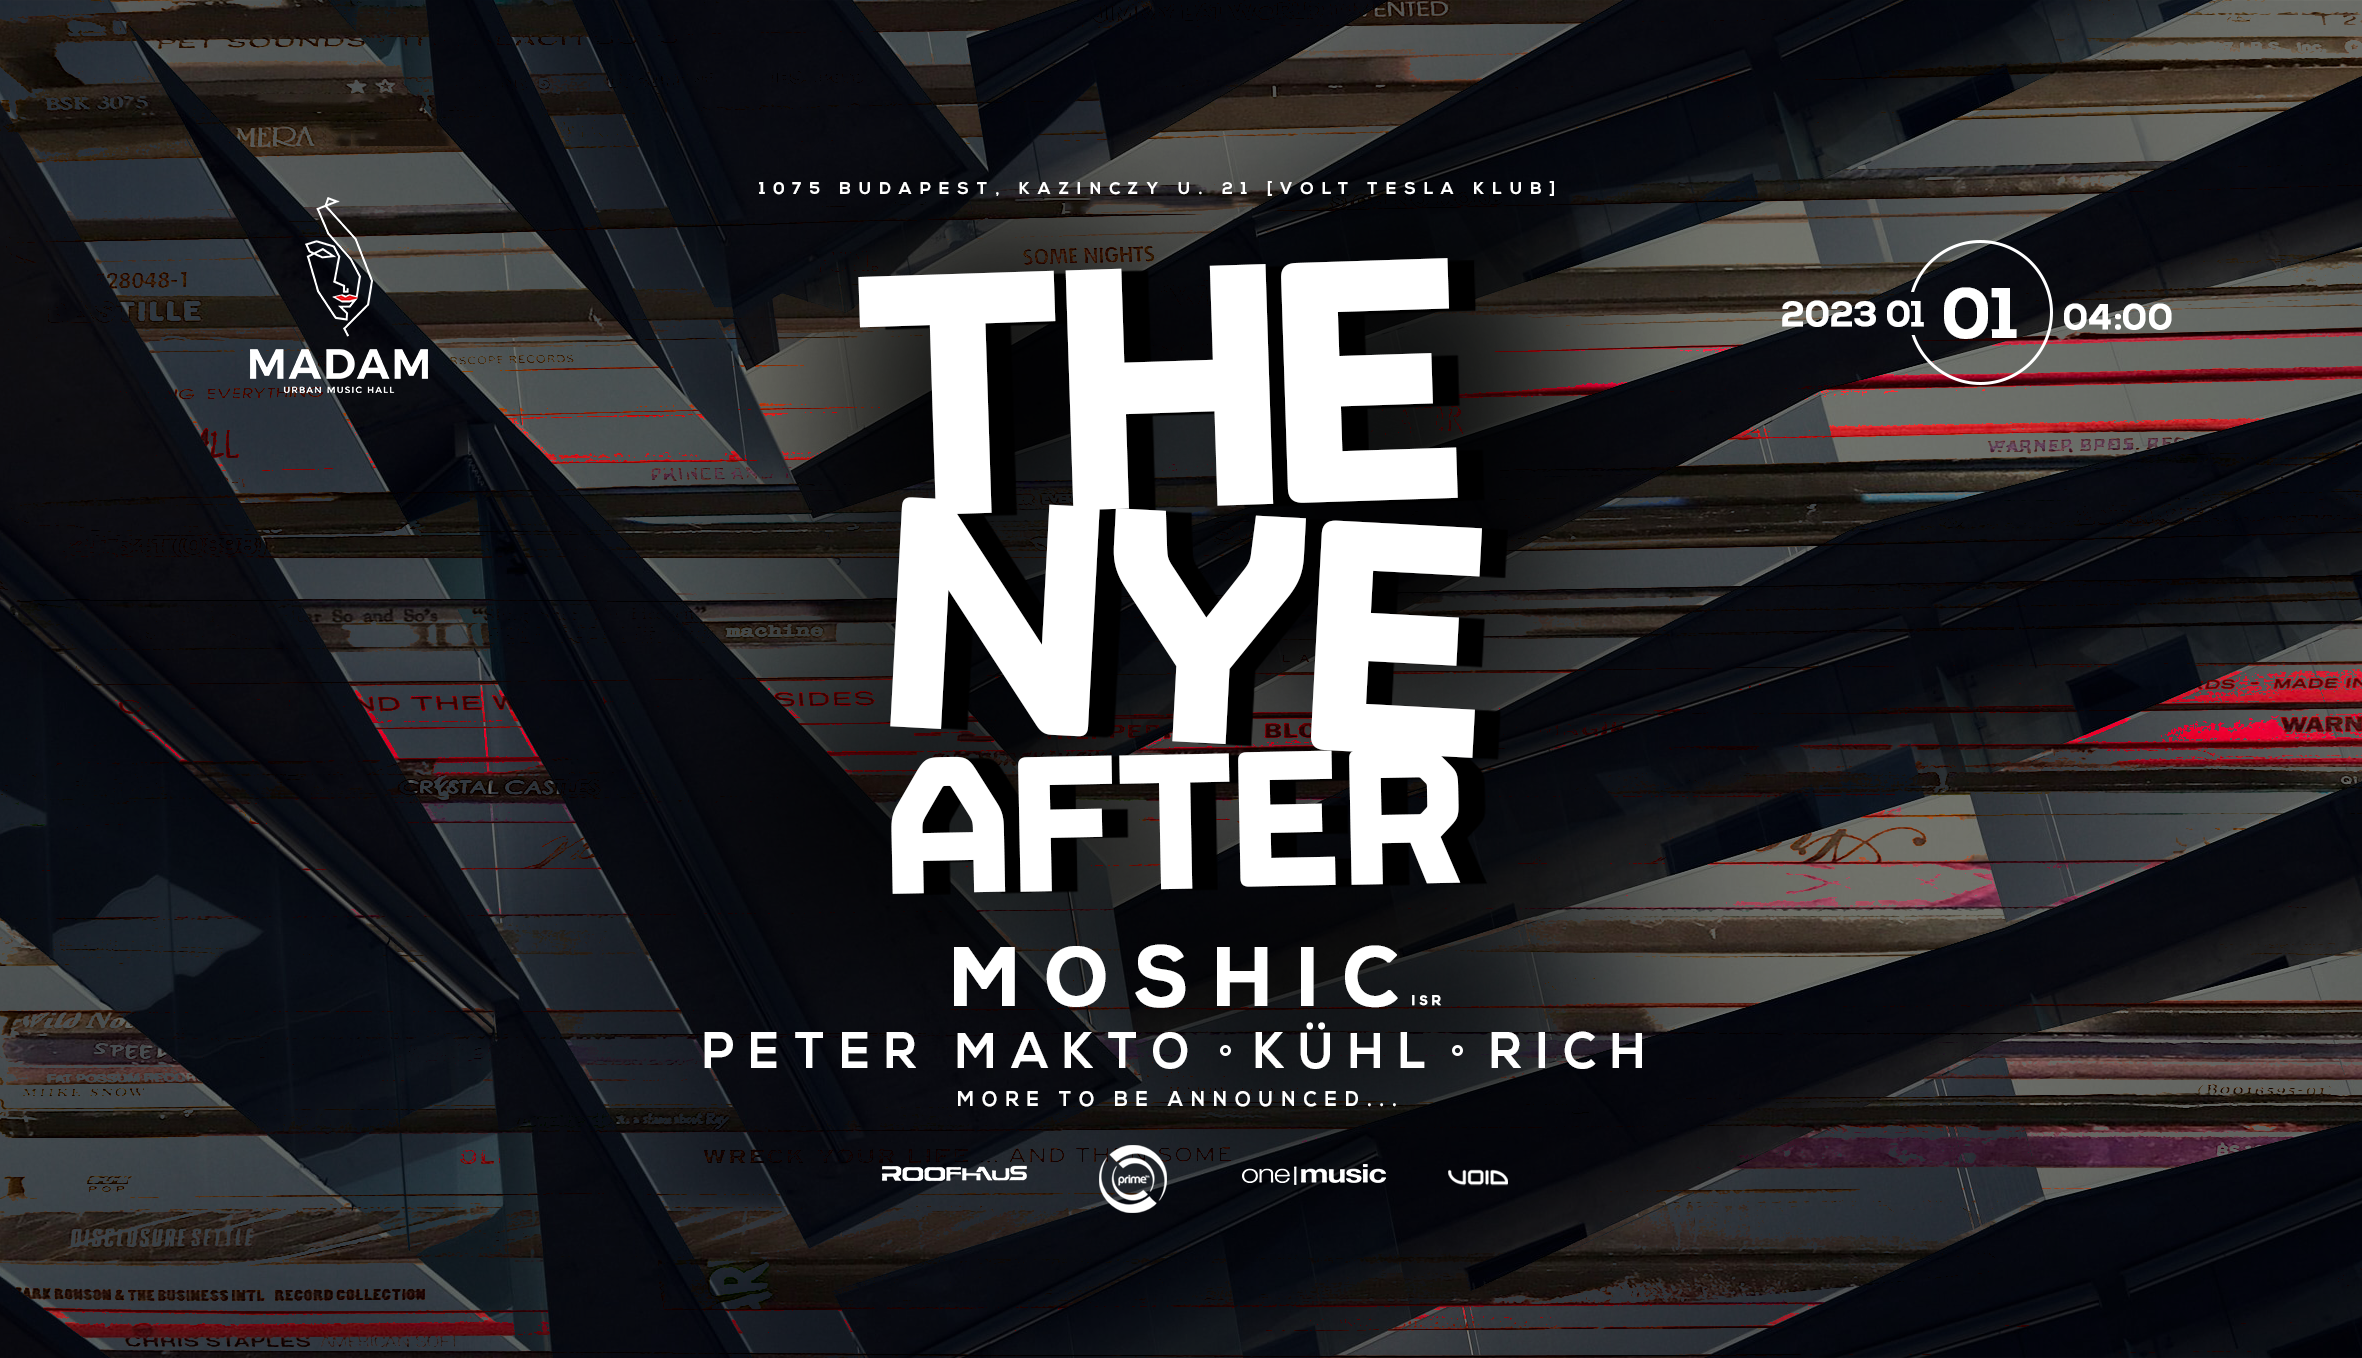 THe NYE AFTeR / 2023-01-01 - フライヤー表